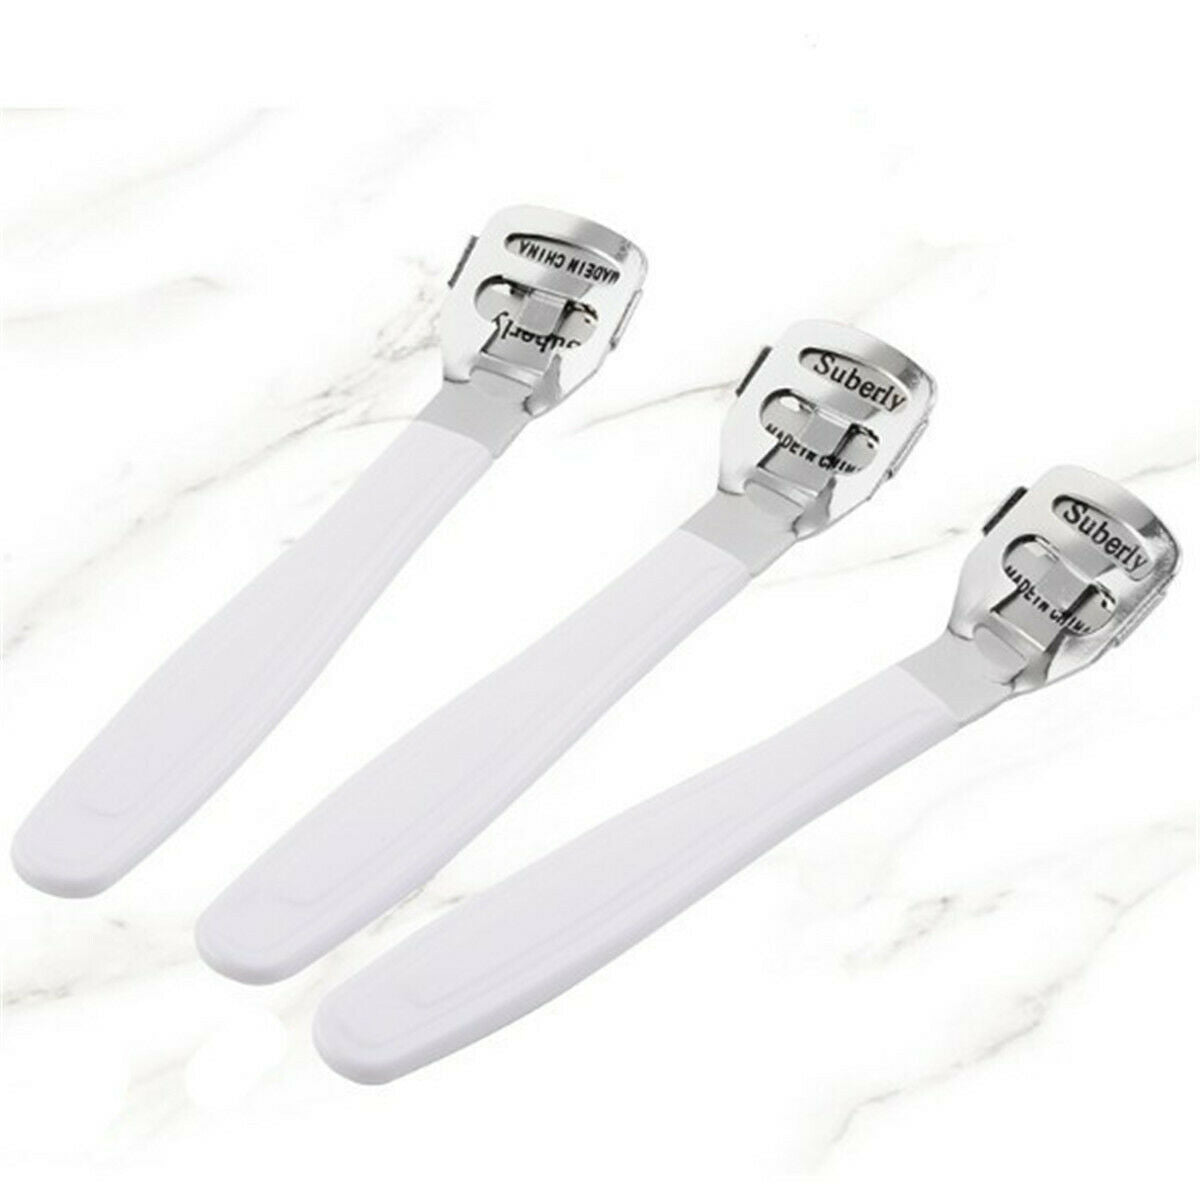 Stainless Steel Hard Skin Corn Callus Remover Cutter Shaver Pedicure Foot Tool